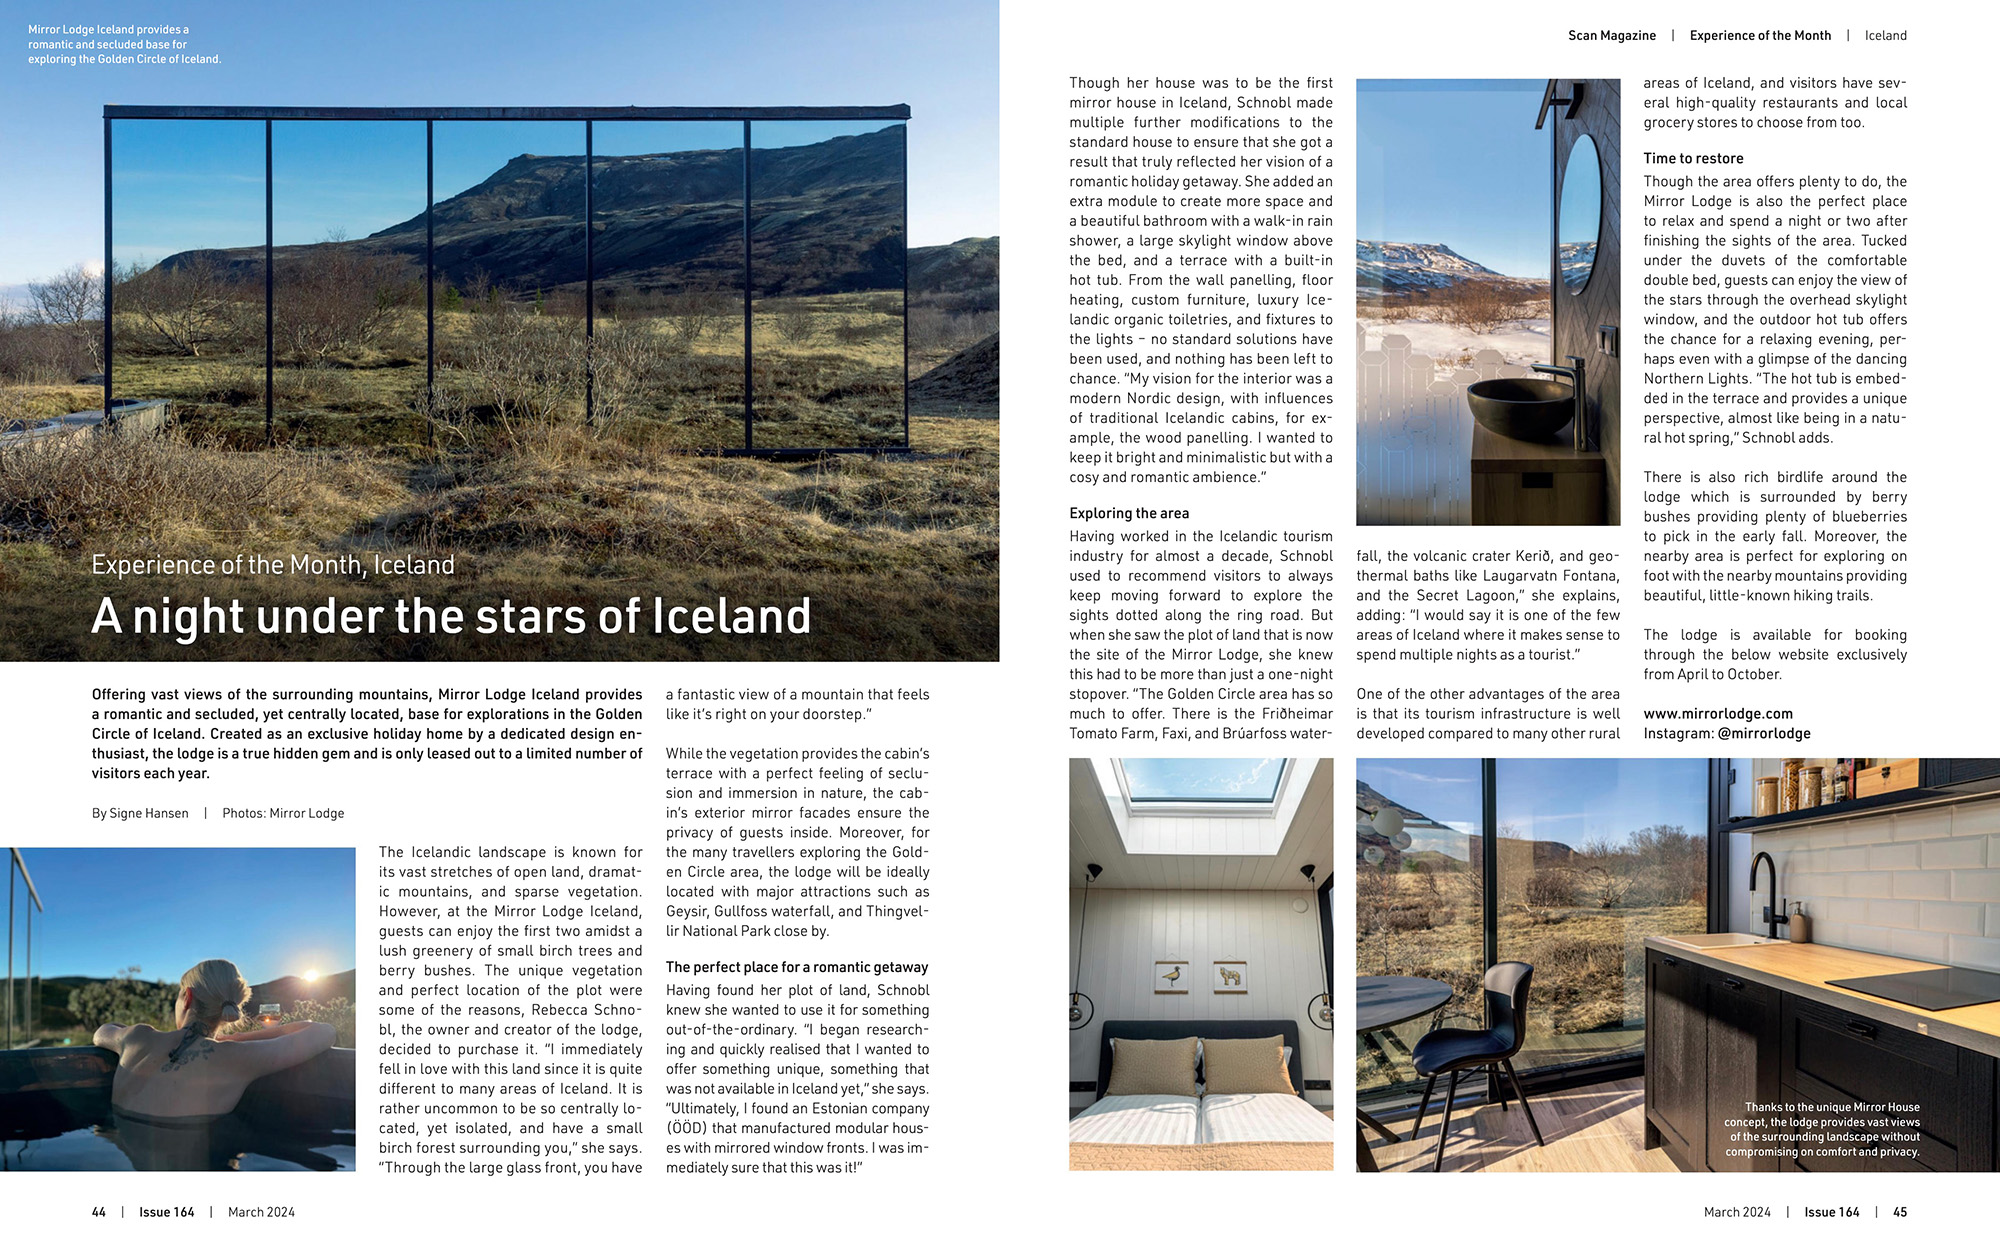 Article about Mirror Lodge Iceland in Scan Magazine.